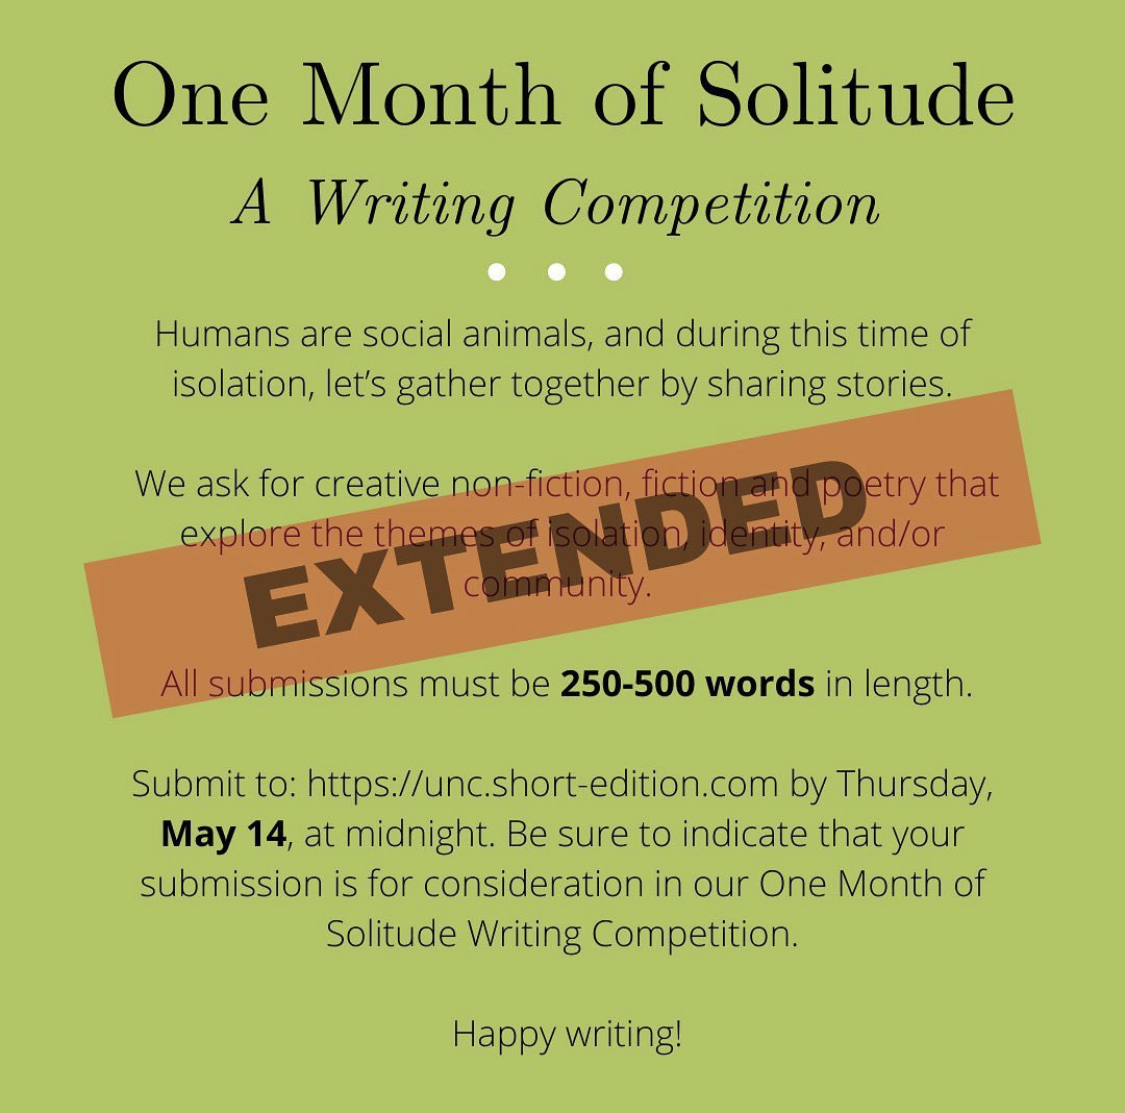 One Month of Solitude Writing Competition - Arts Everywhere